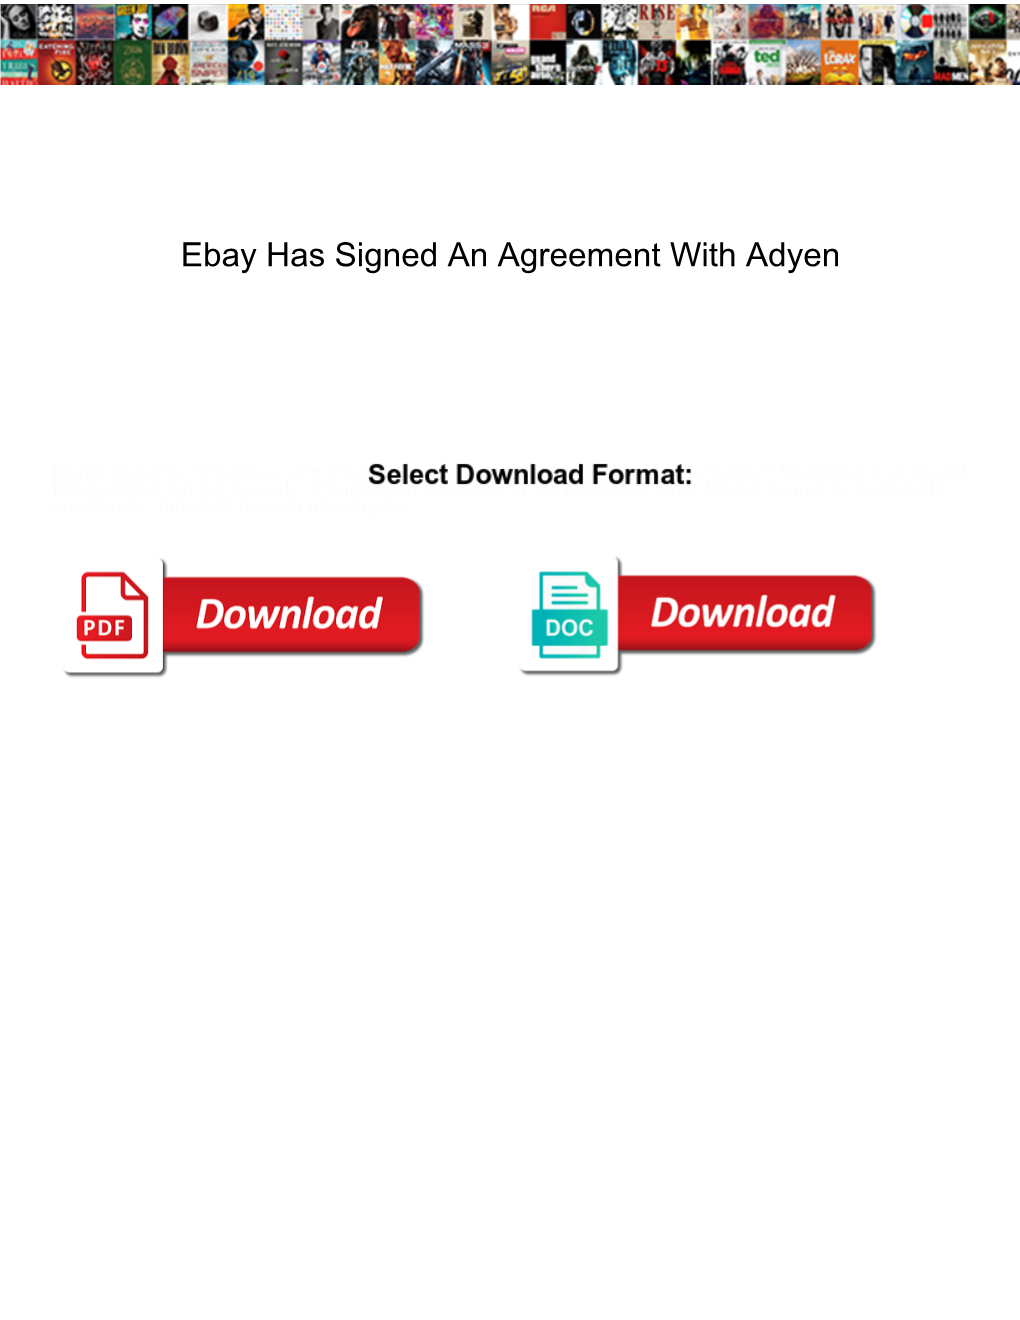 Ebay Has Signed an Agreement with Adyen